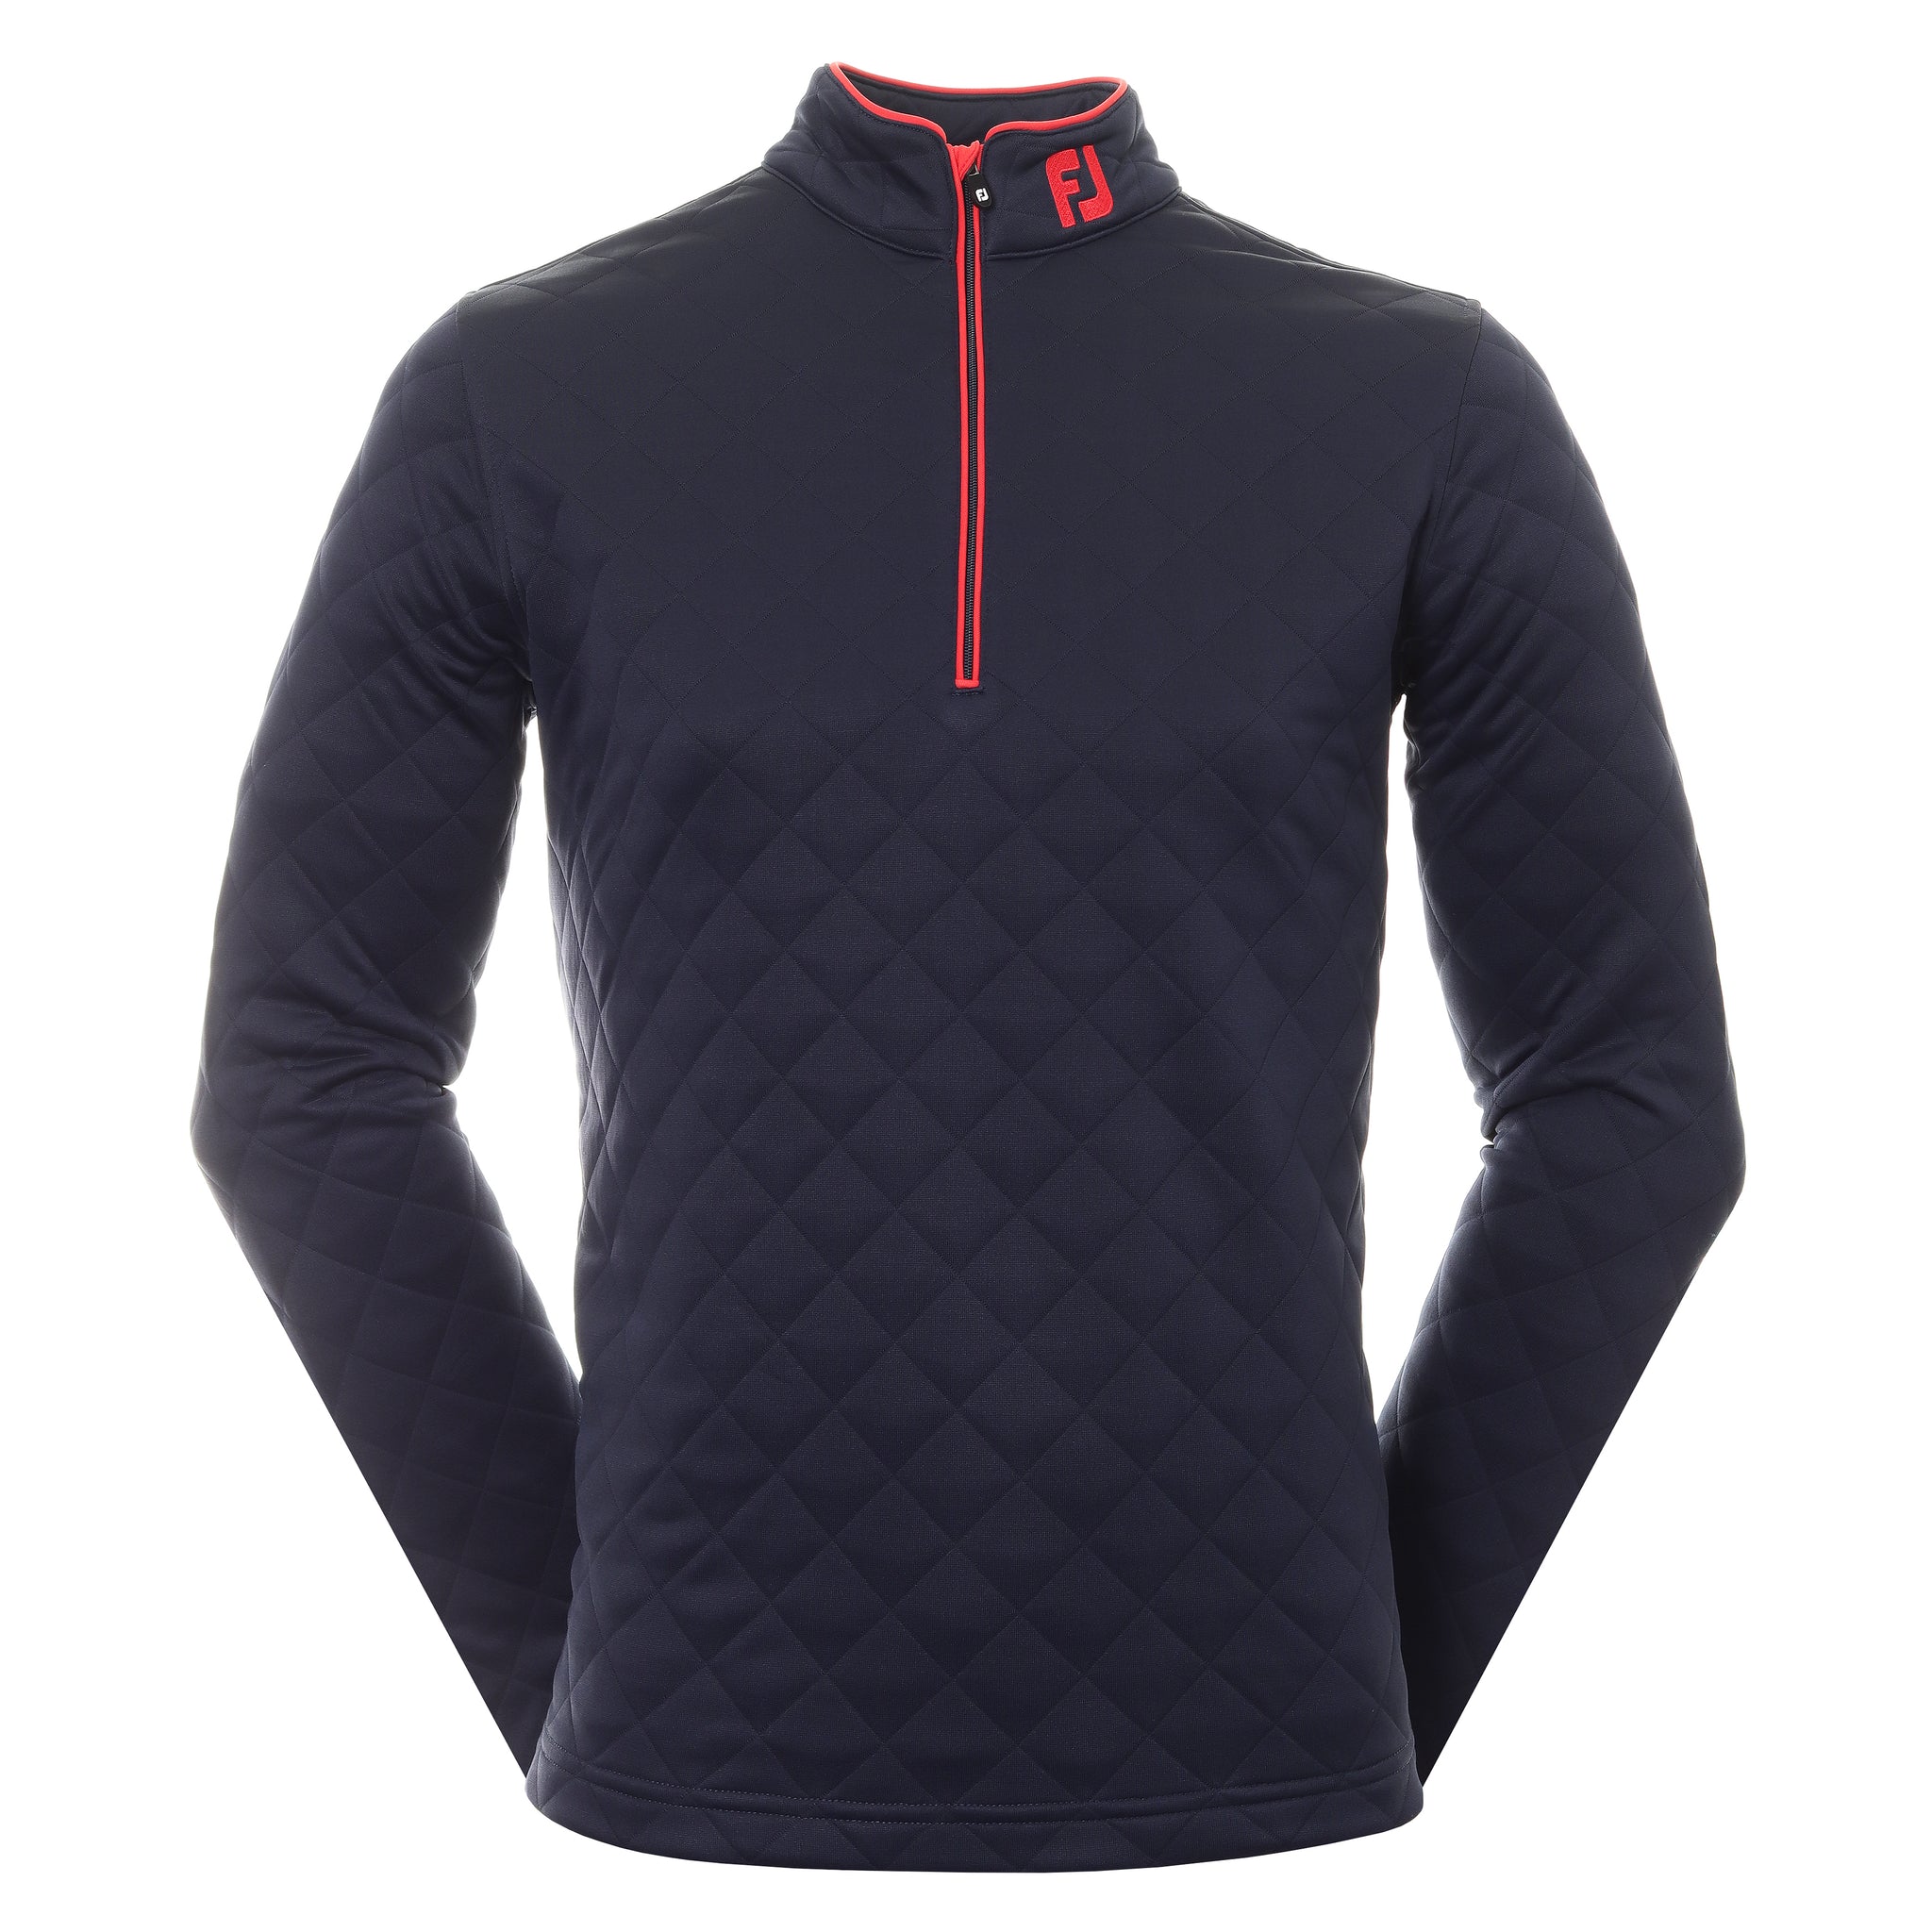 footjoy-diamond-quilted-chill-out-pullover-88452-navy-red